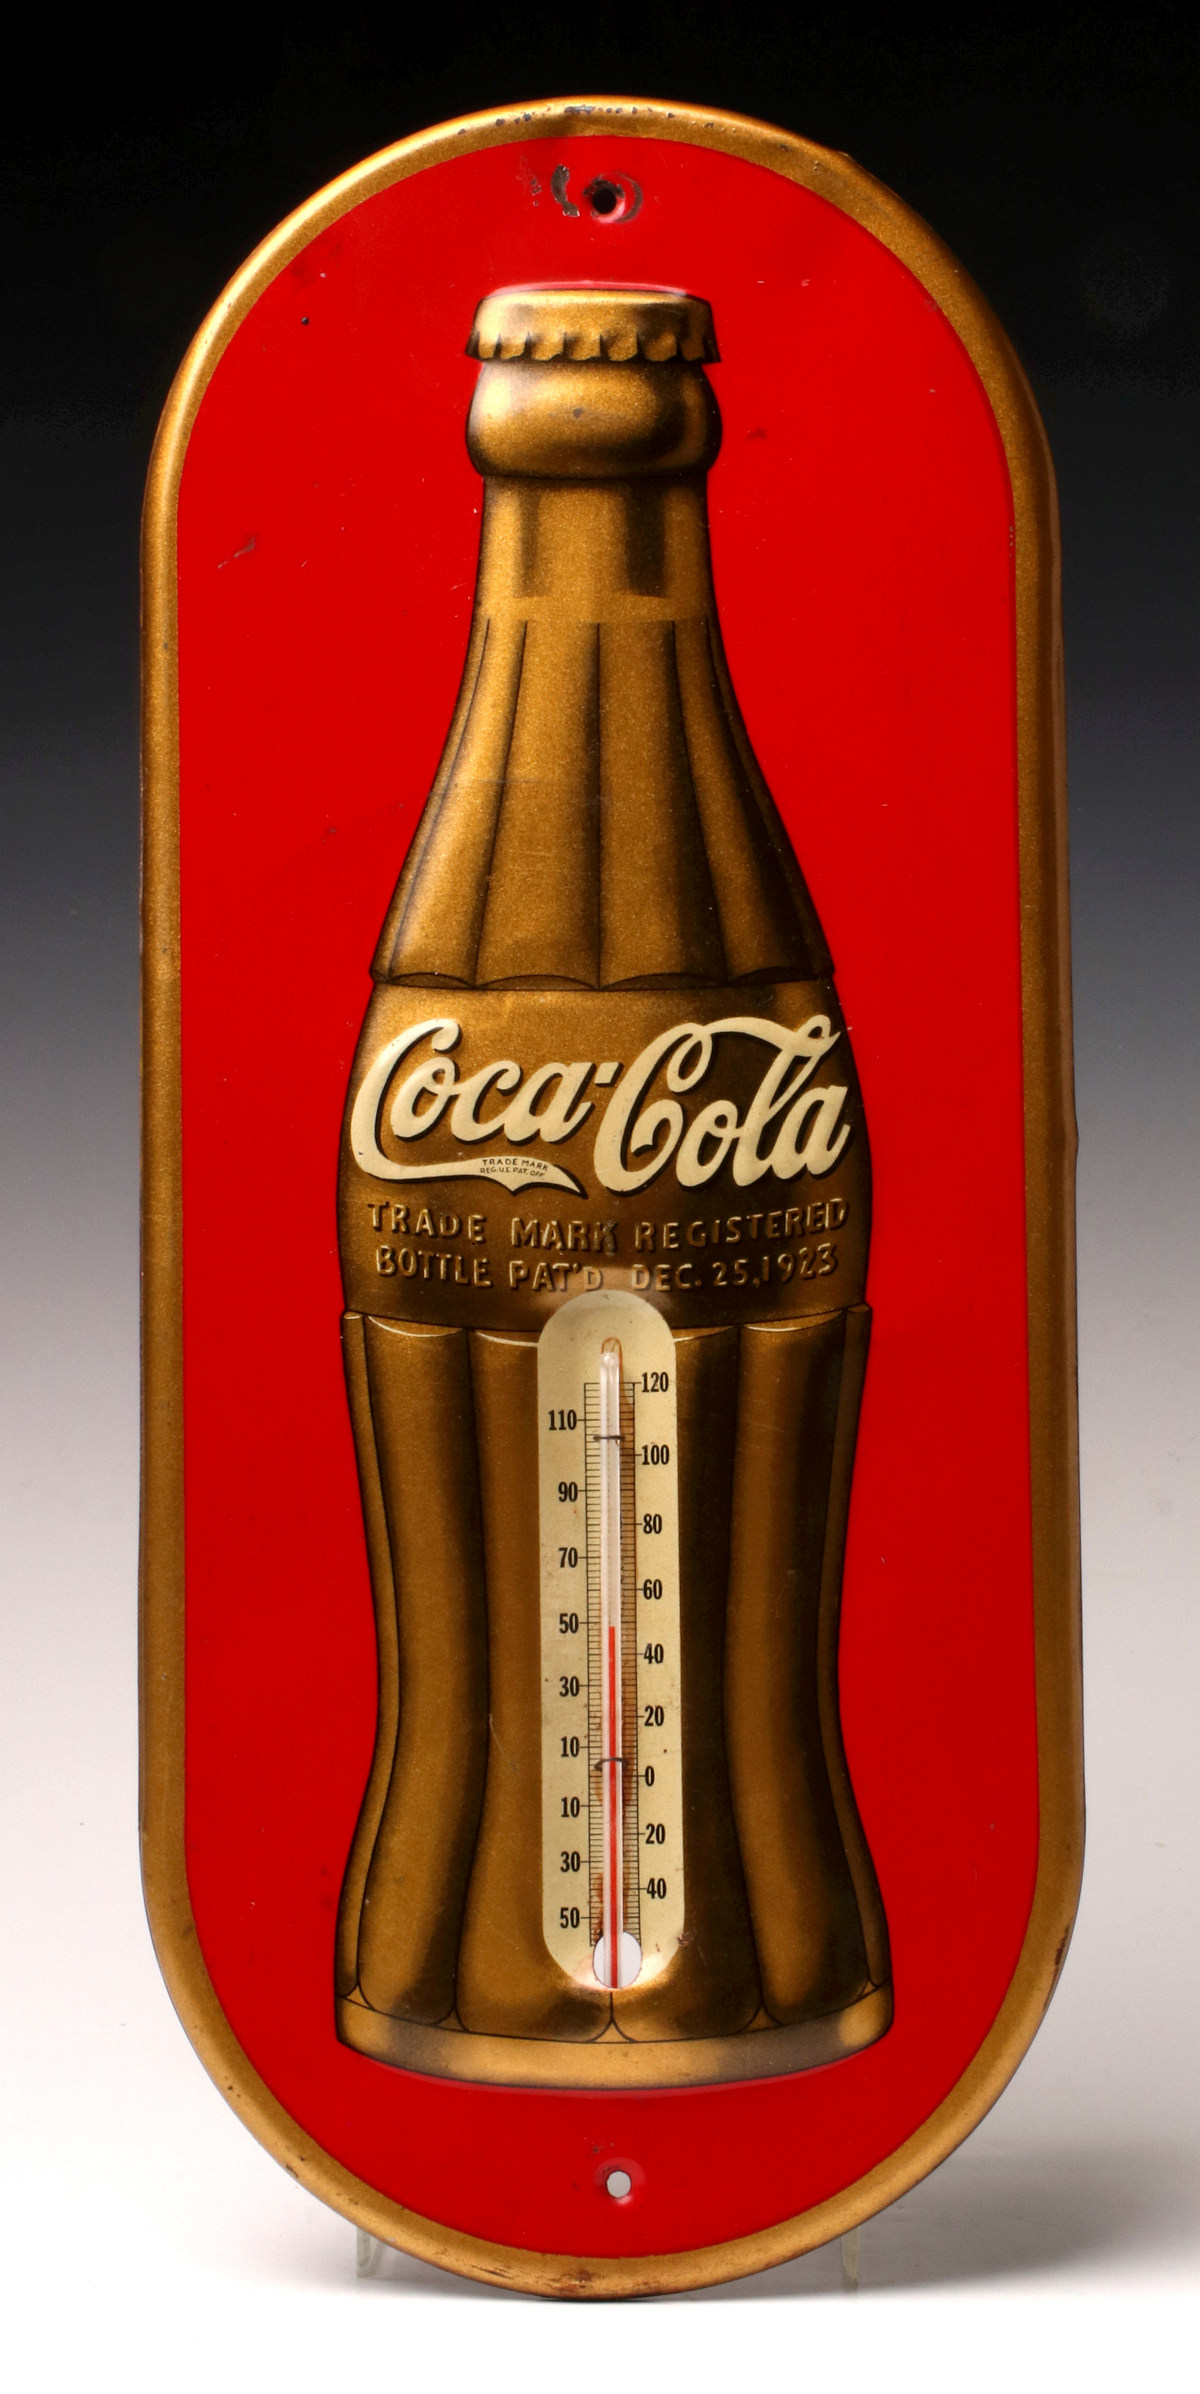 A TIN LITHO COCA-COLA ADVERT. THERMOMETER CA. 1936